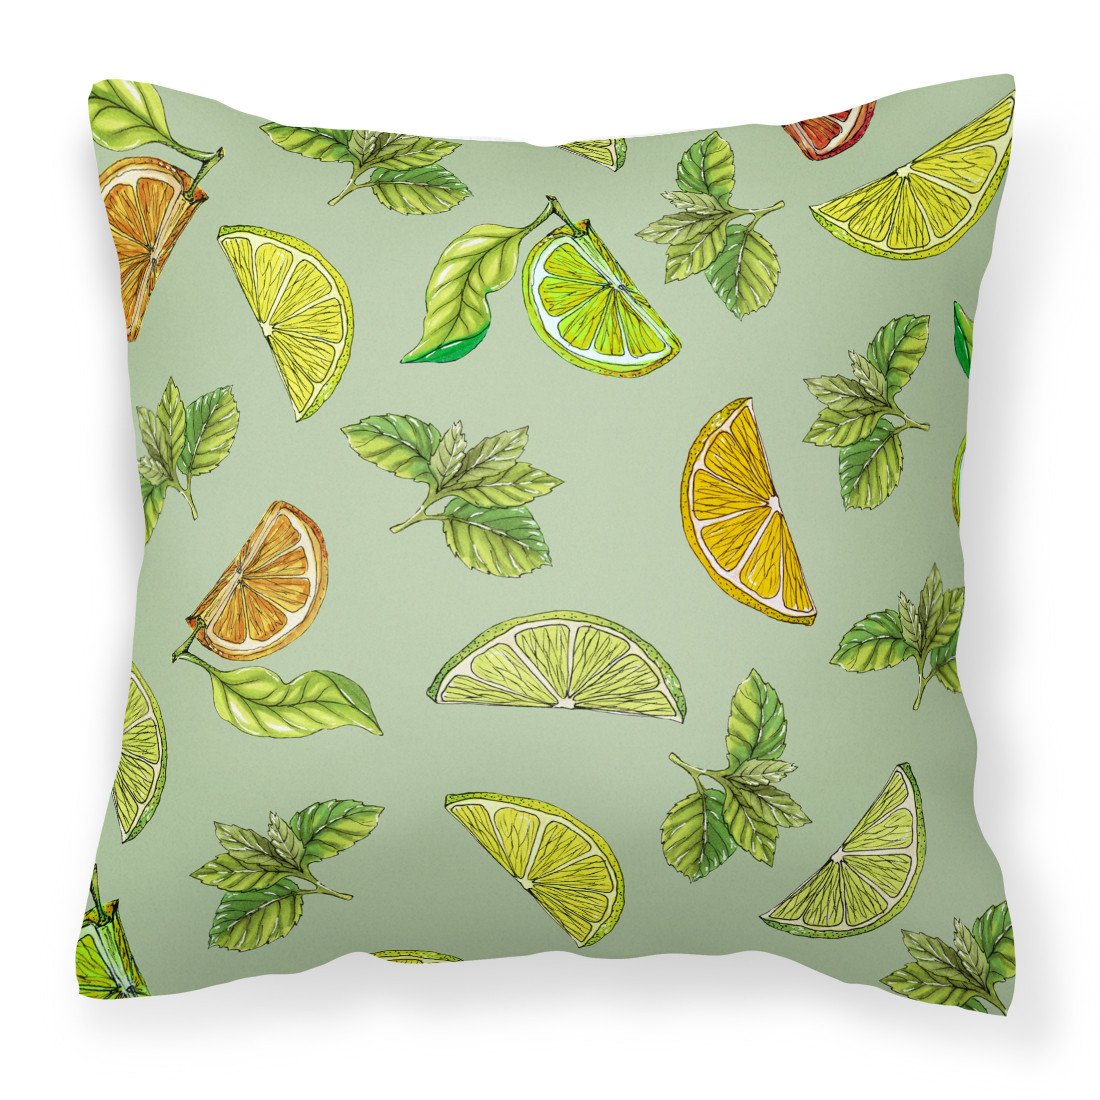 Lemons, Limes and Oranges Fabric Decorative Pillow BB5206PW1818 by Caroline's Treasures